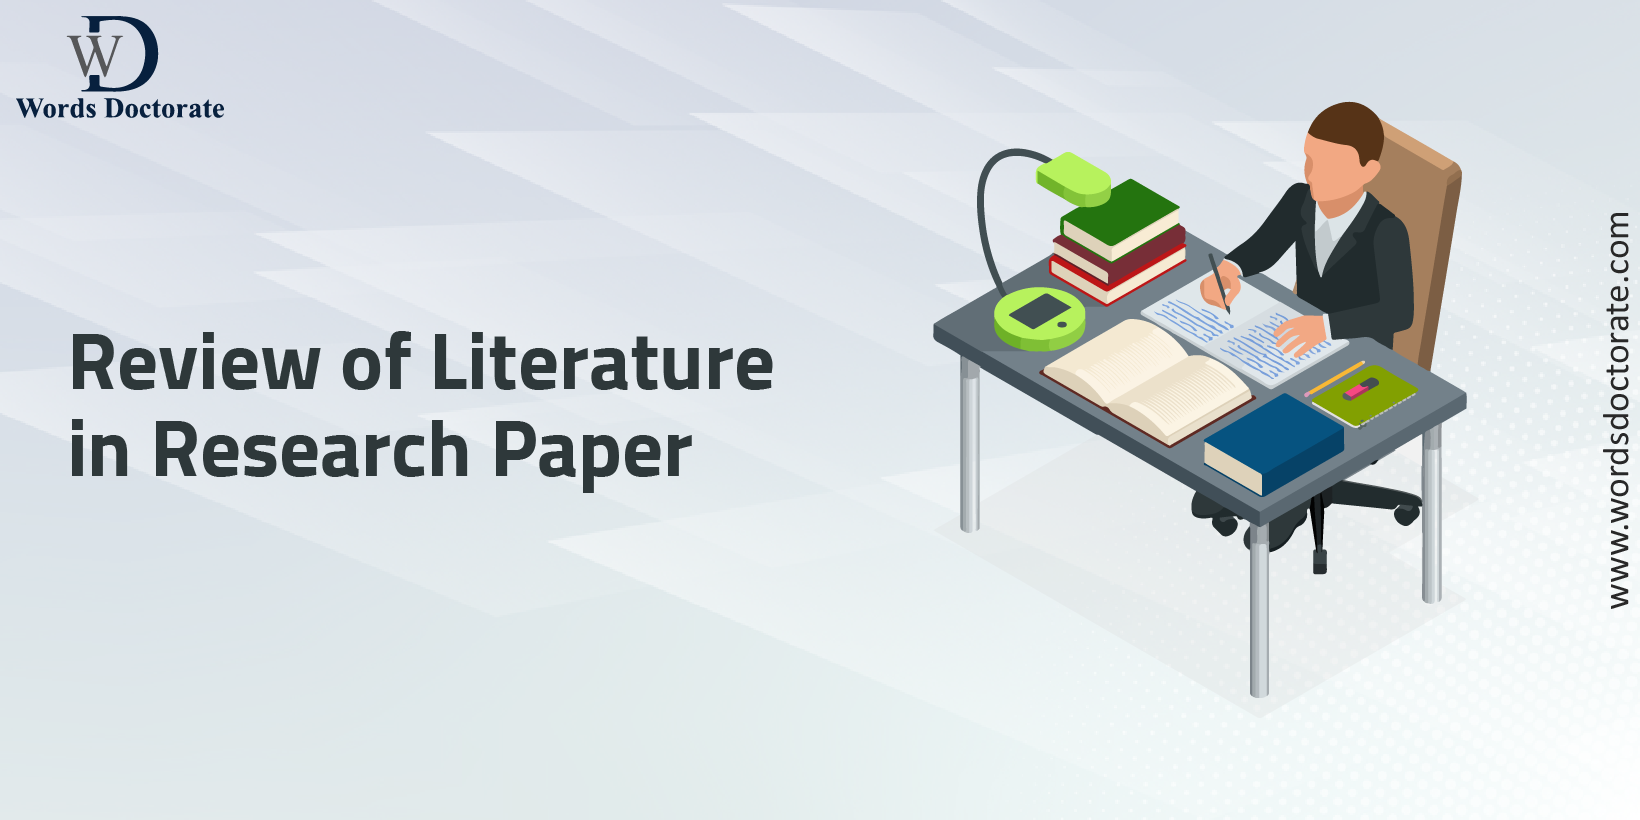 Review of Literature in Research Paper